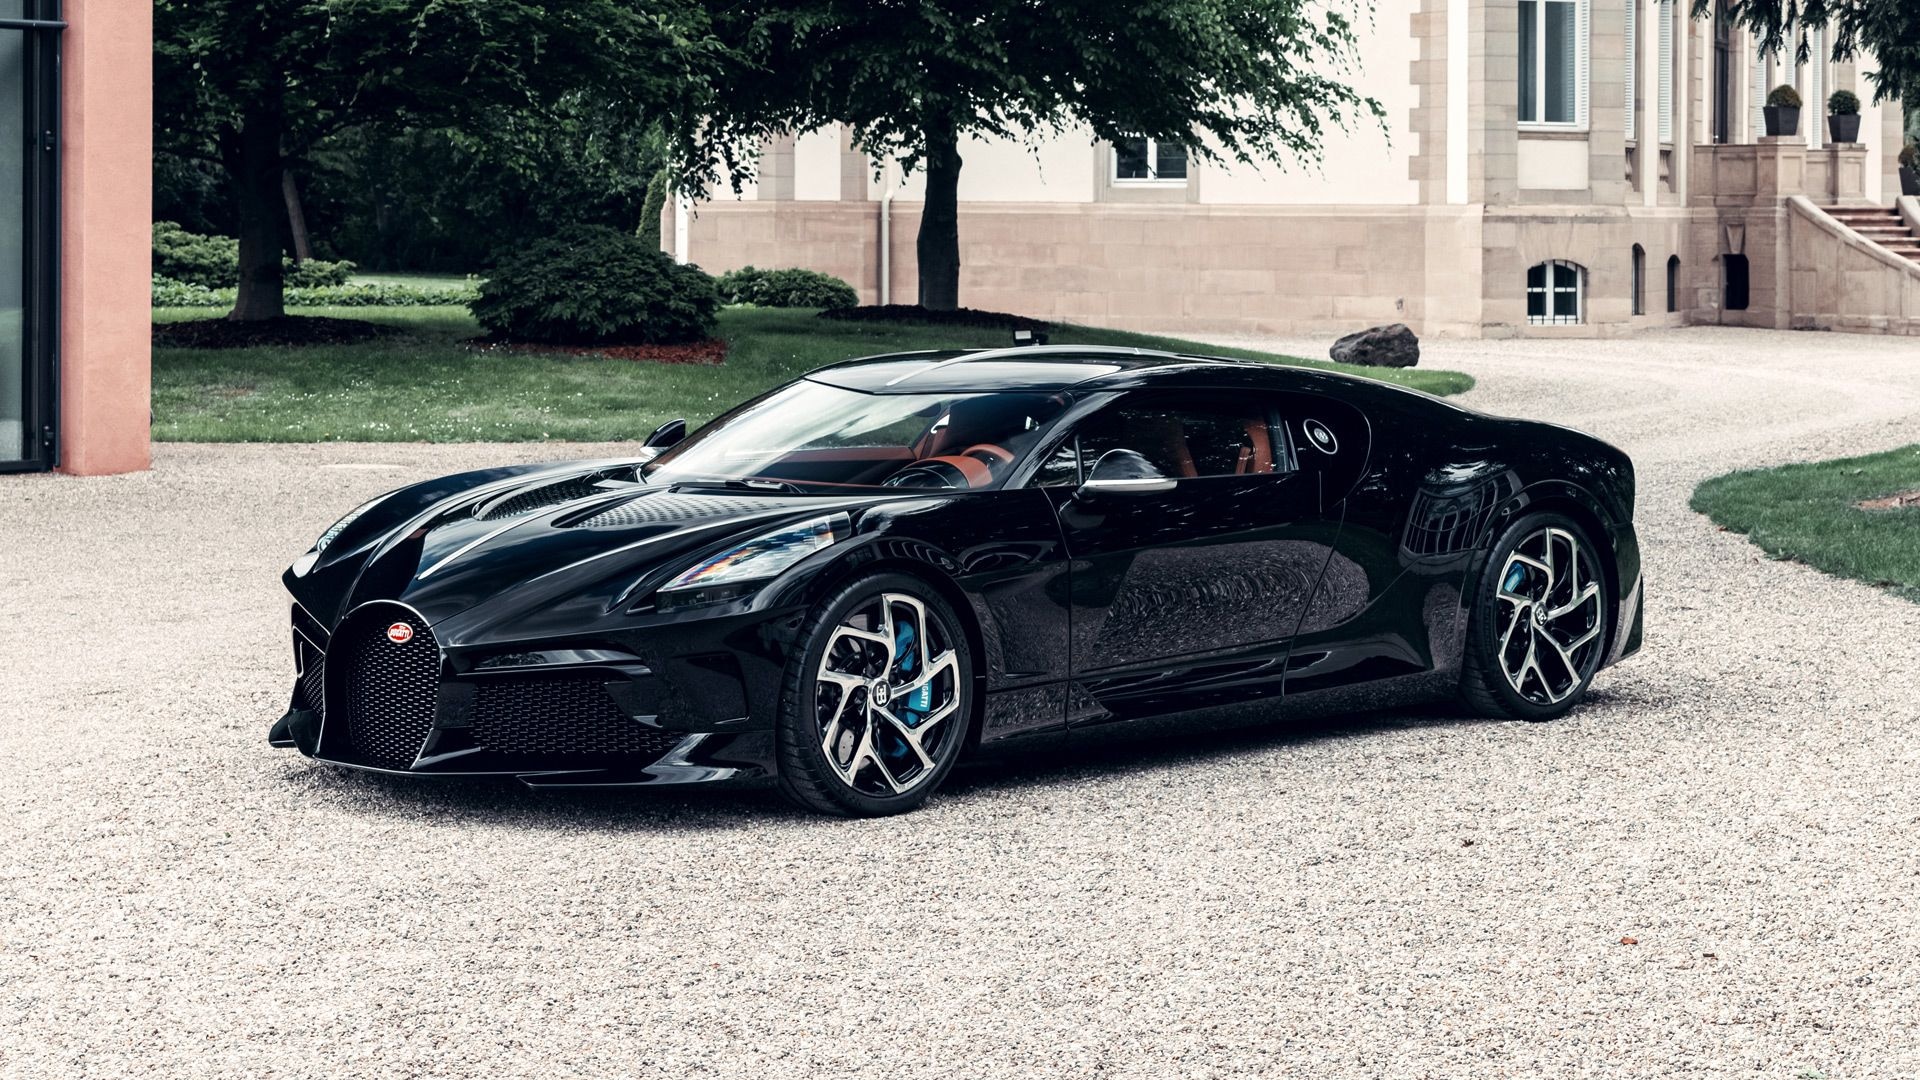 Banyan droom Omhoog gaan 1-of-1 Bugatti La Voiture Noire finally ready for delivery